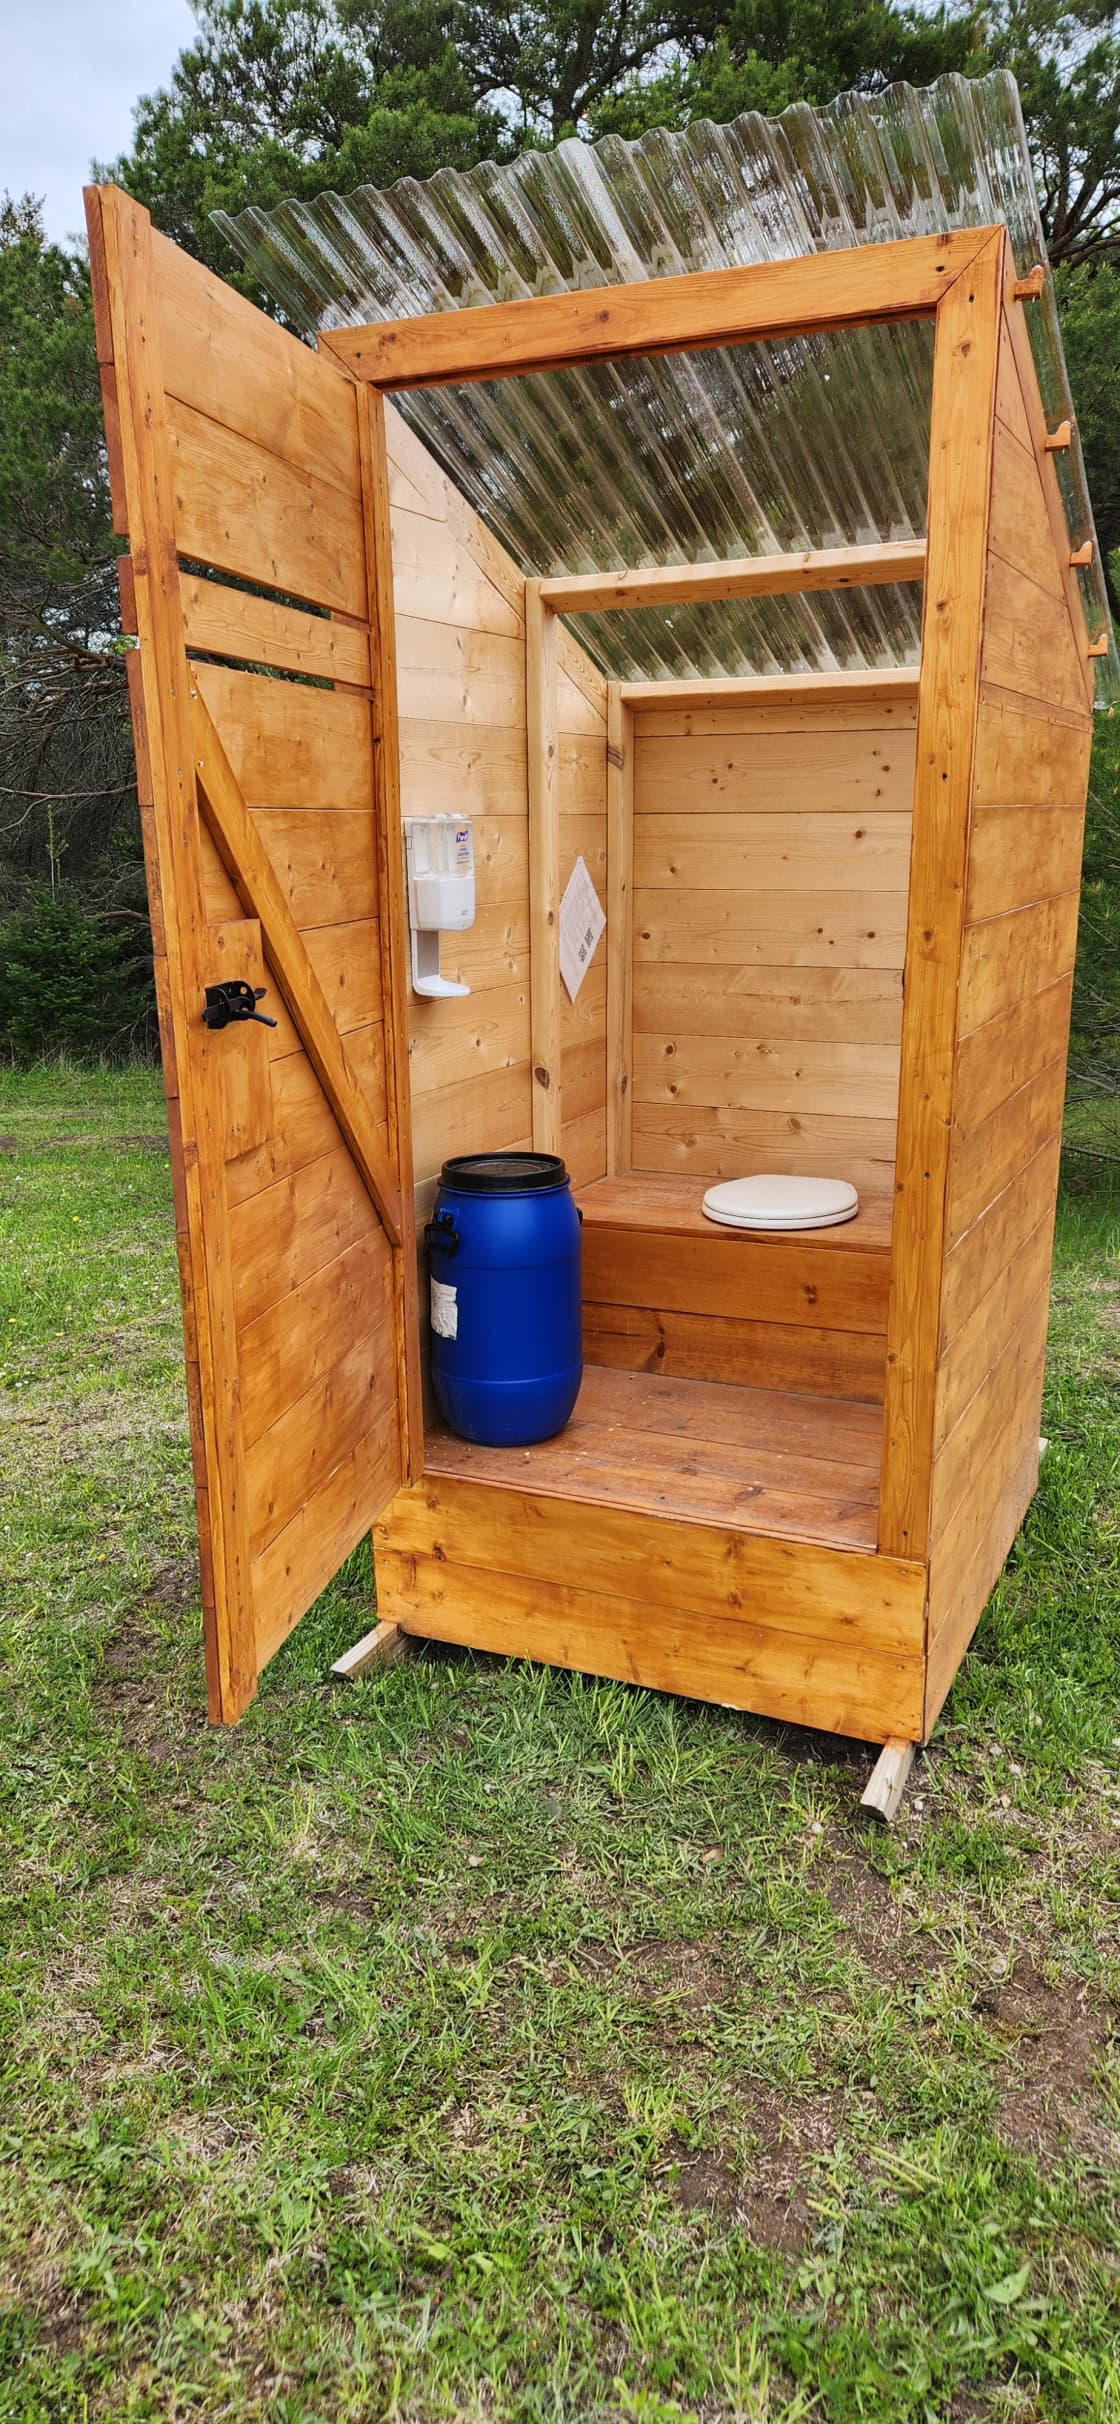 Interior of composting outhouse. Blue barrel holds the sawdust. Hand sanitizer station as well as instructions for the virtual library hang on the wall.